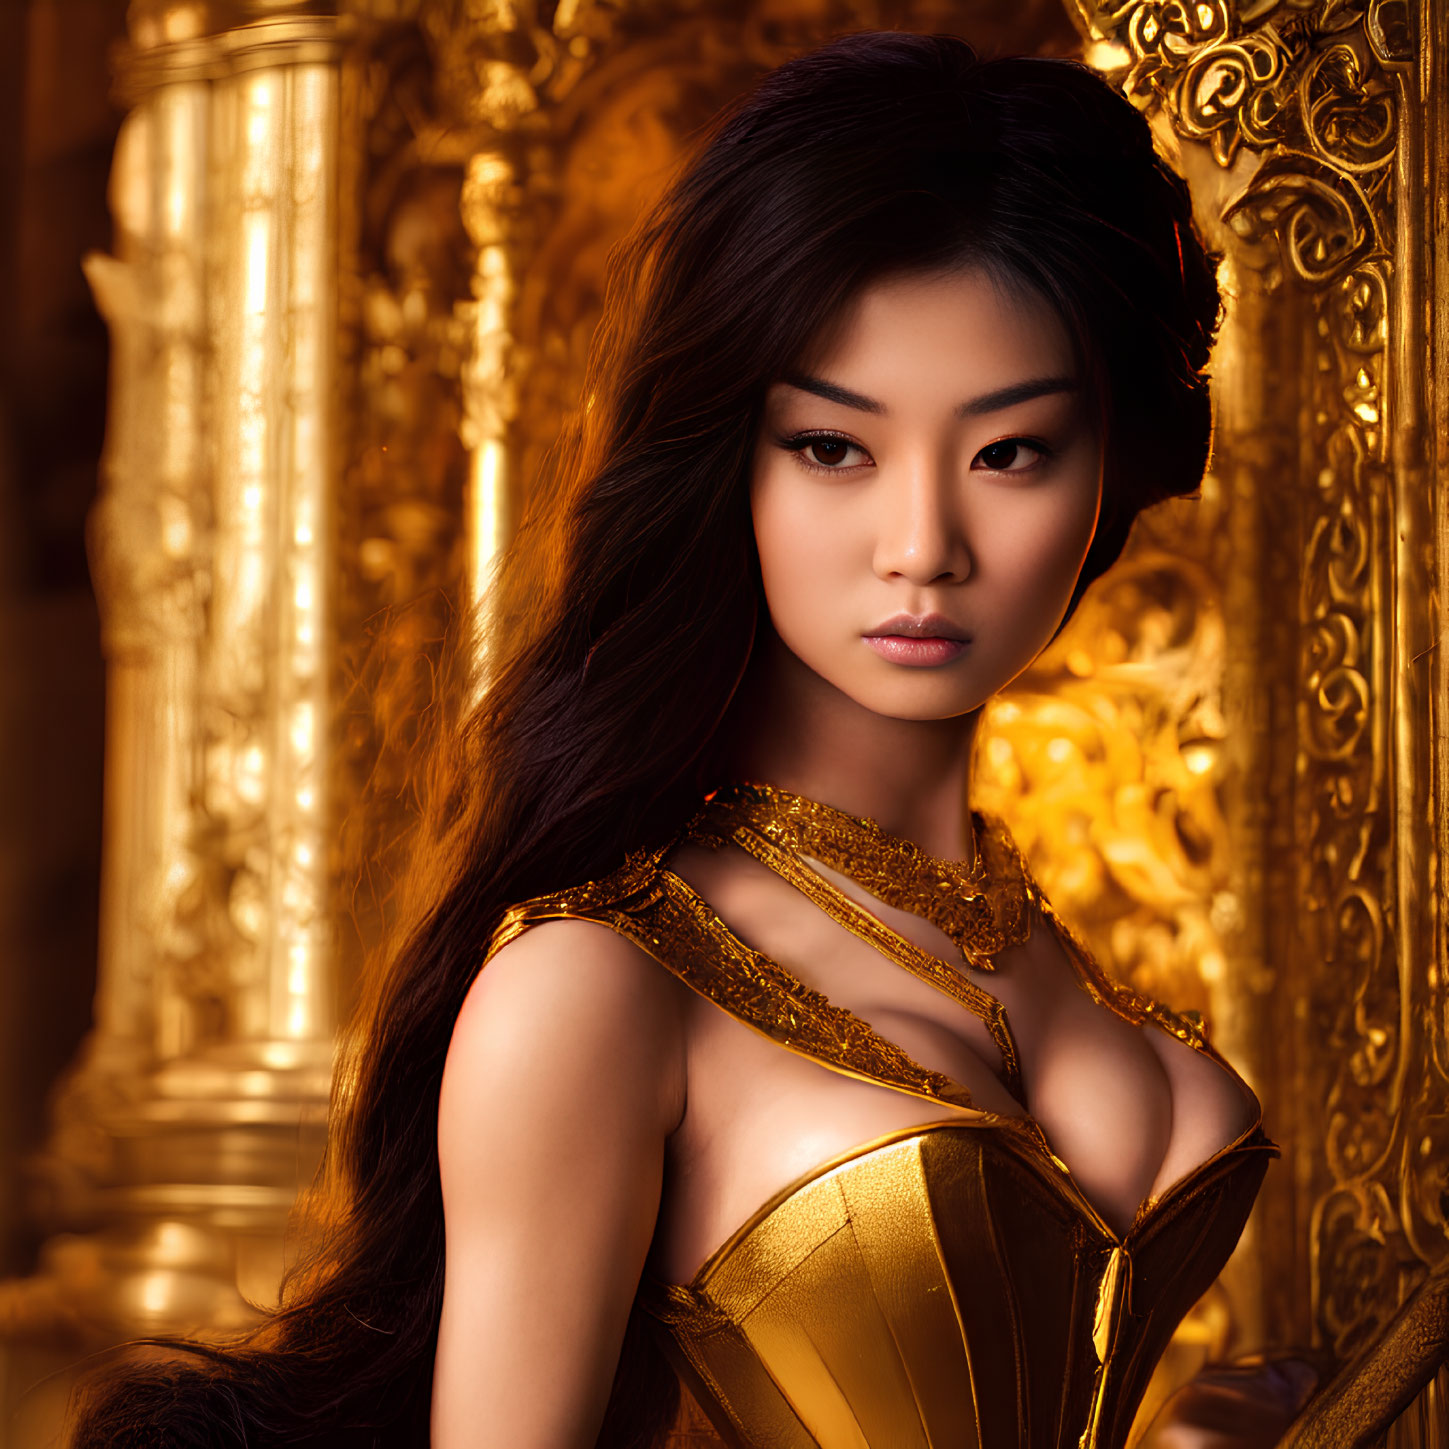 Golden Costume Woman Poses with Ornate Background